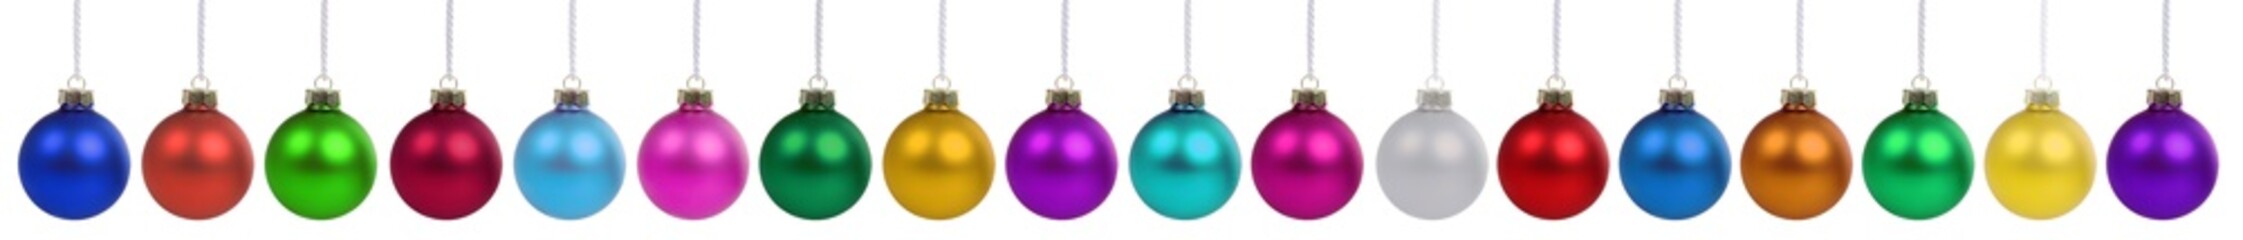 Christmas balls baubles banner advent decoration in a row isolated on white